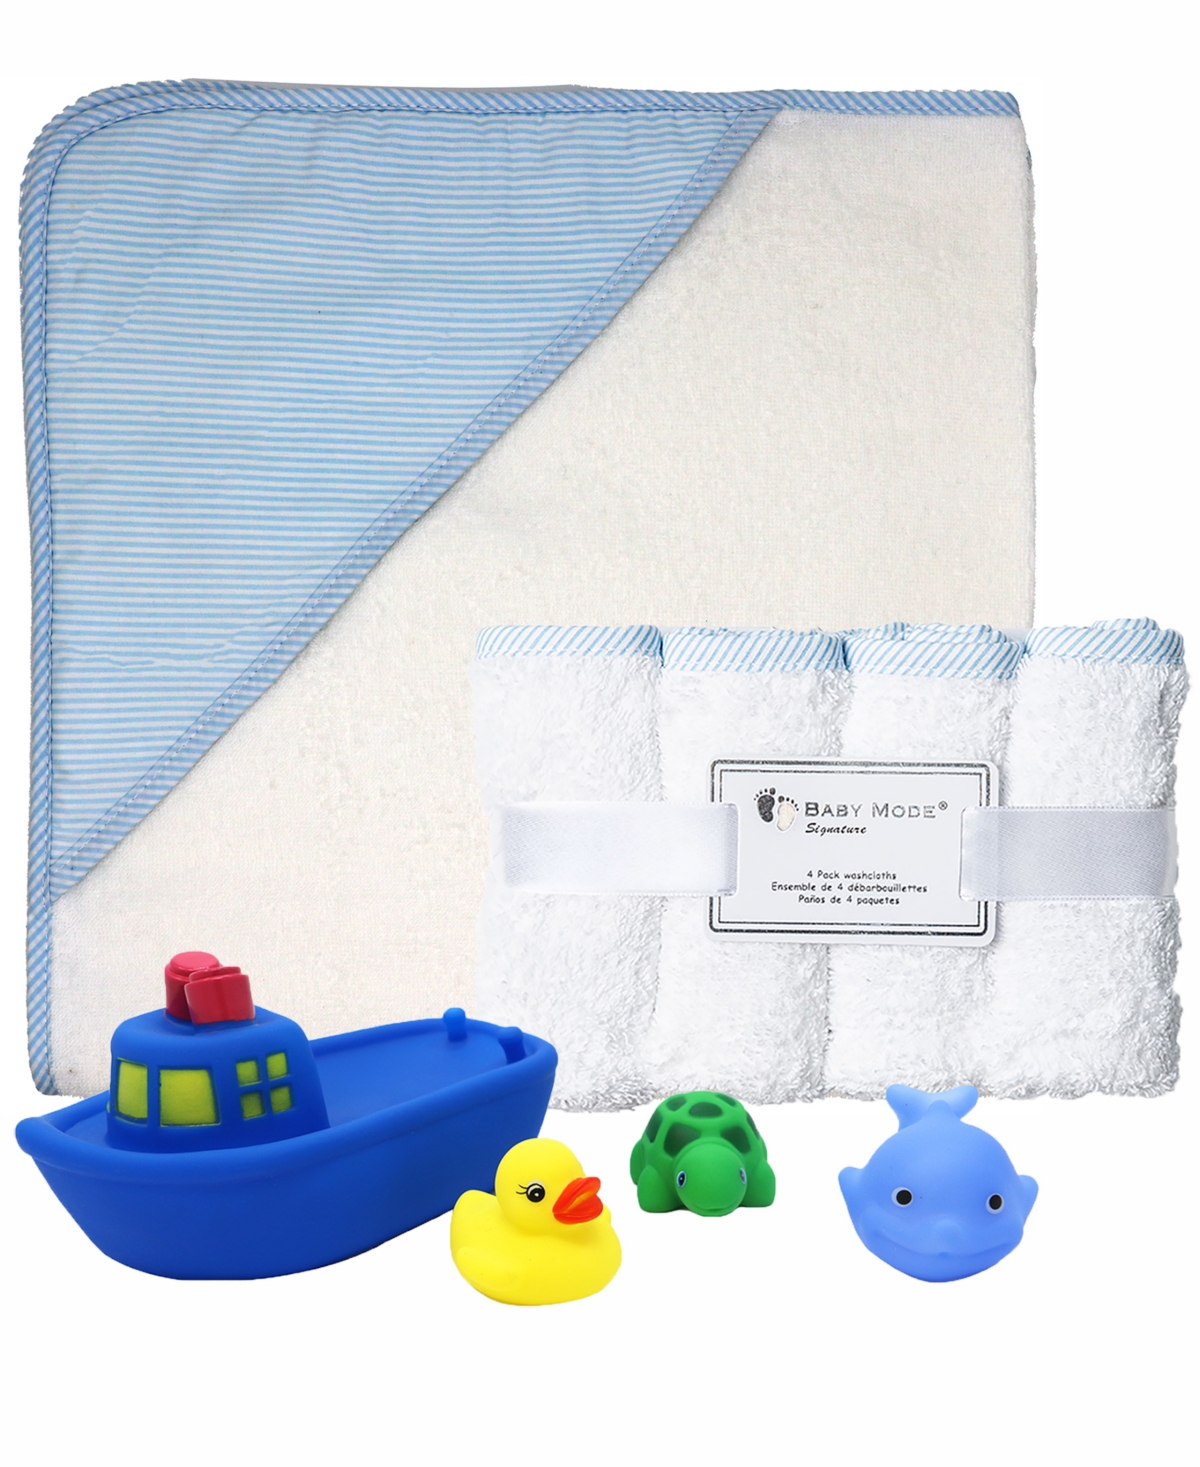 Baby Mode Signature Baby Boys Bath Towel, Washcloth, And Toys, 9 Piece Set In Blue